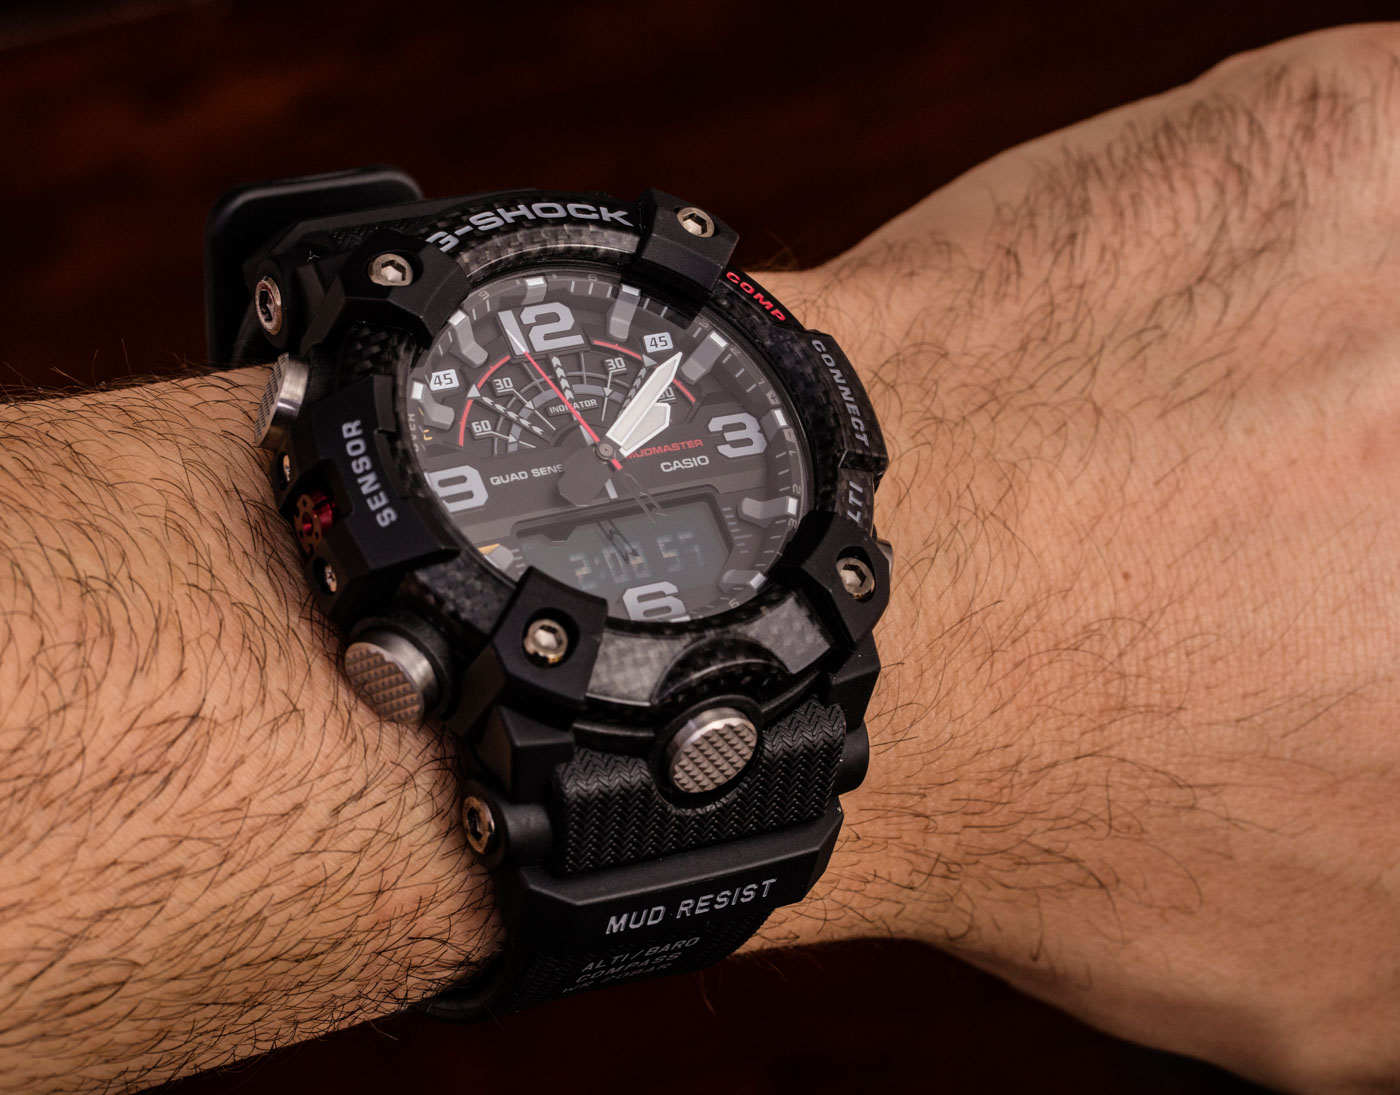 Casio G Shock Mudmaster Gg B100 Watch Review Full Of Style Value Features Ablogtowatch